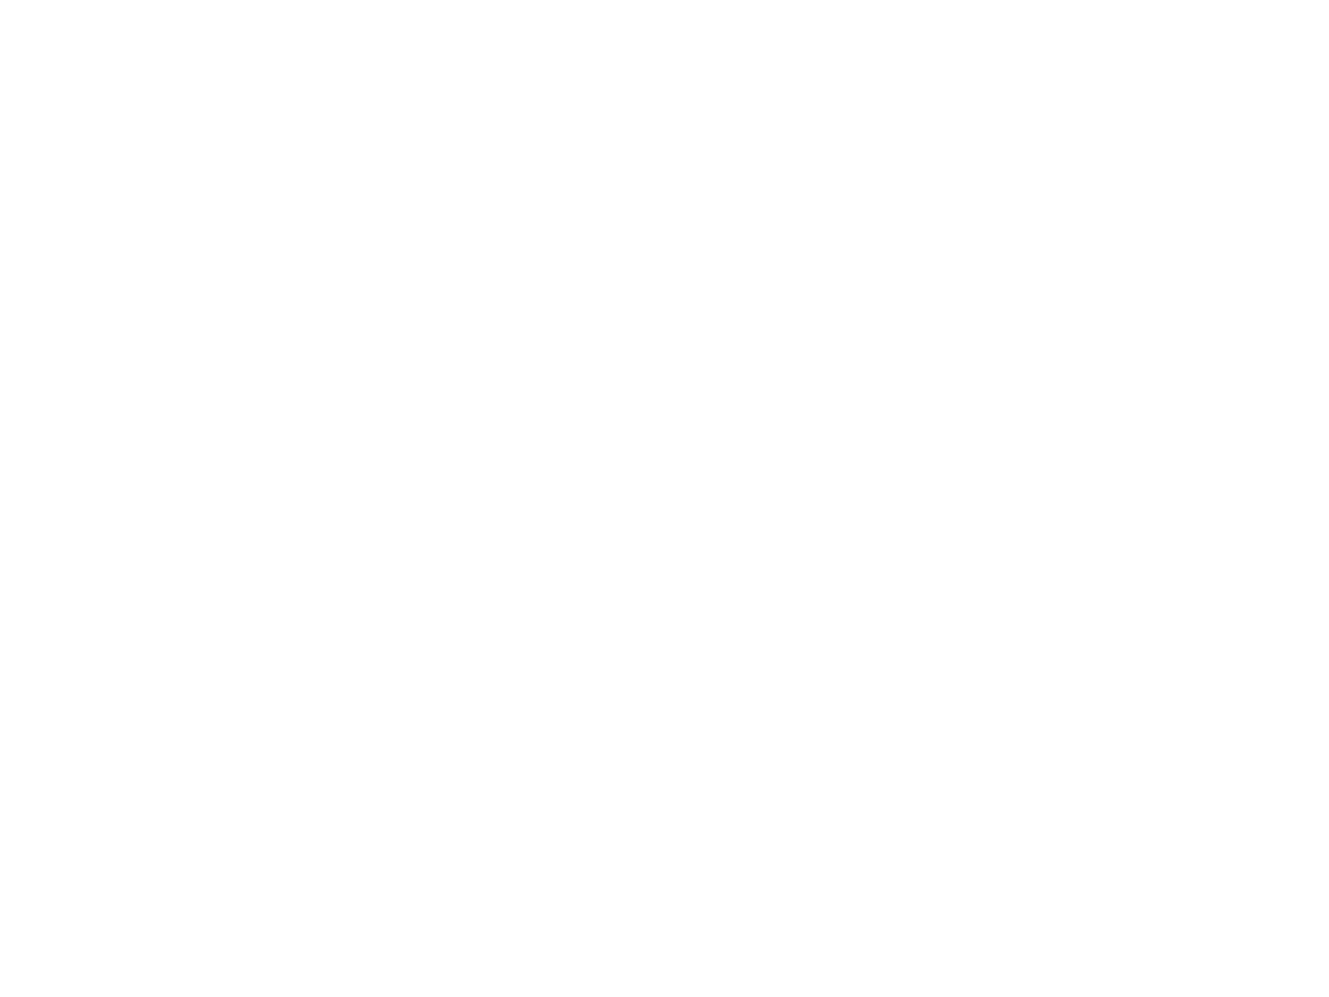 One TV